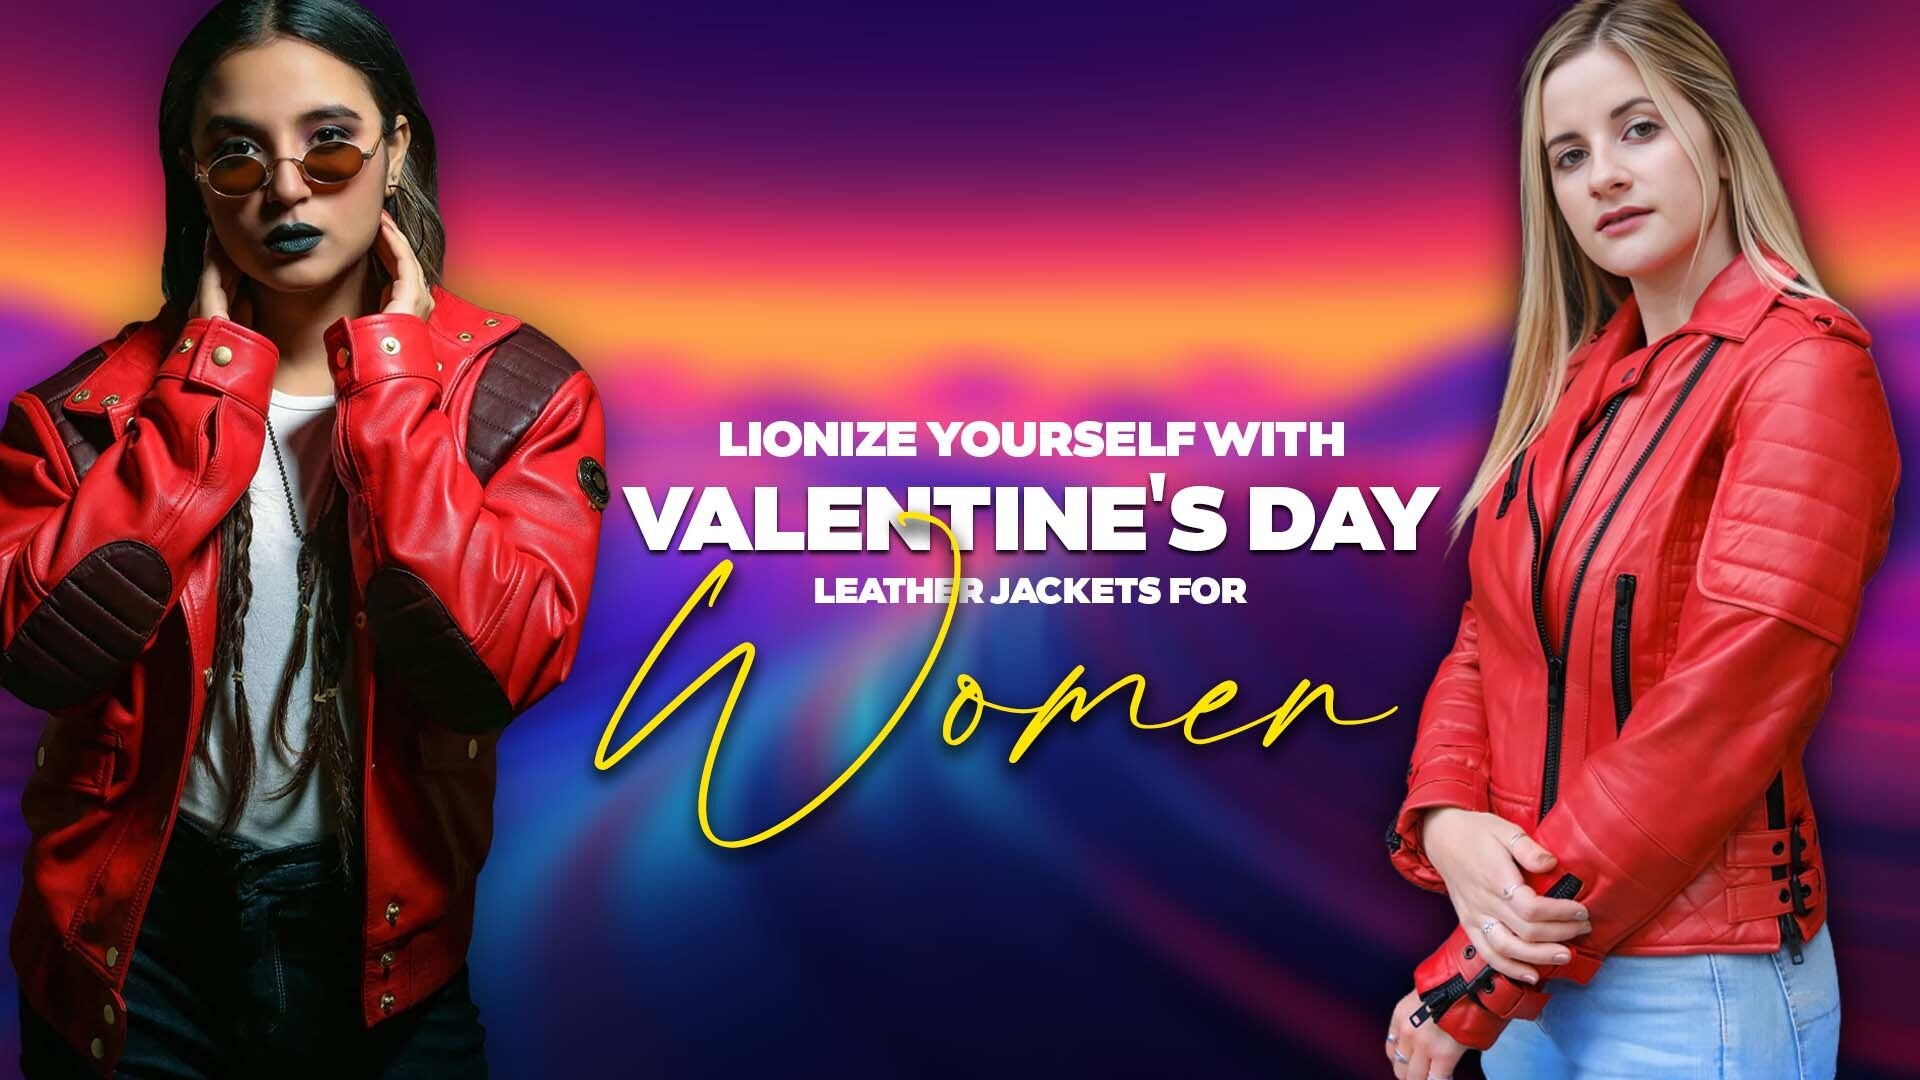 Lionize Yourself With Valentine's Day Leather Jackets For Women